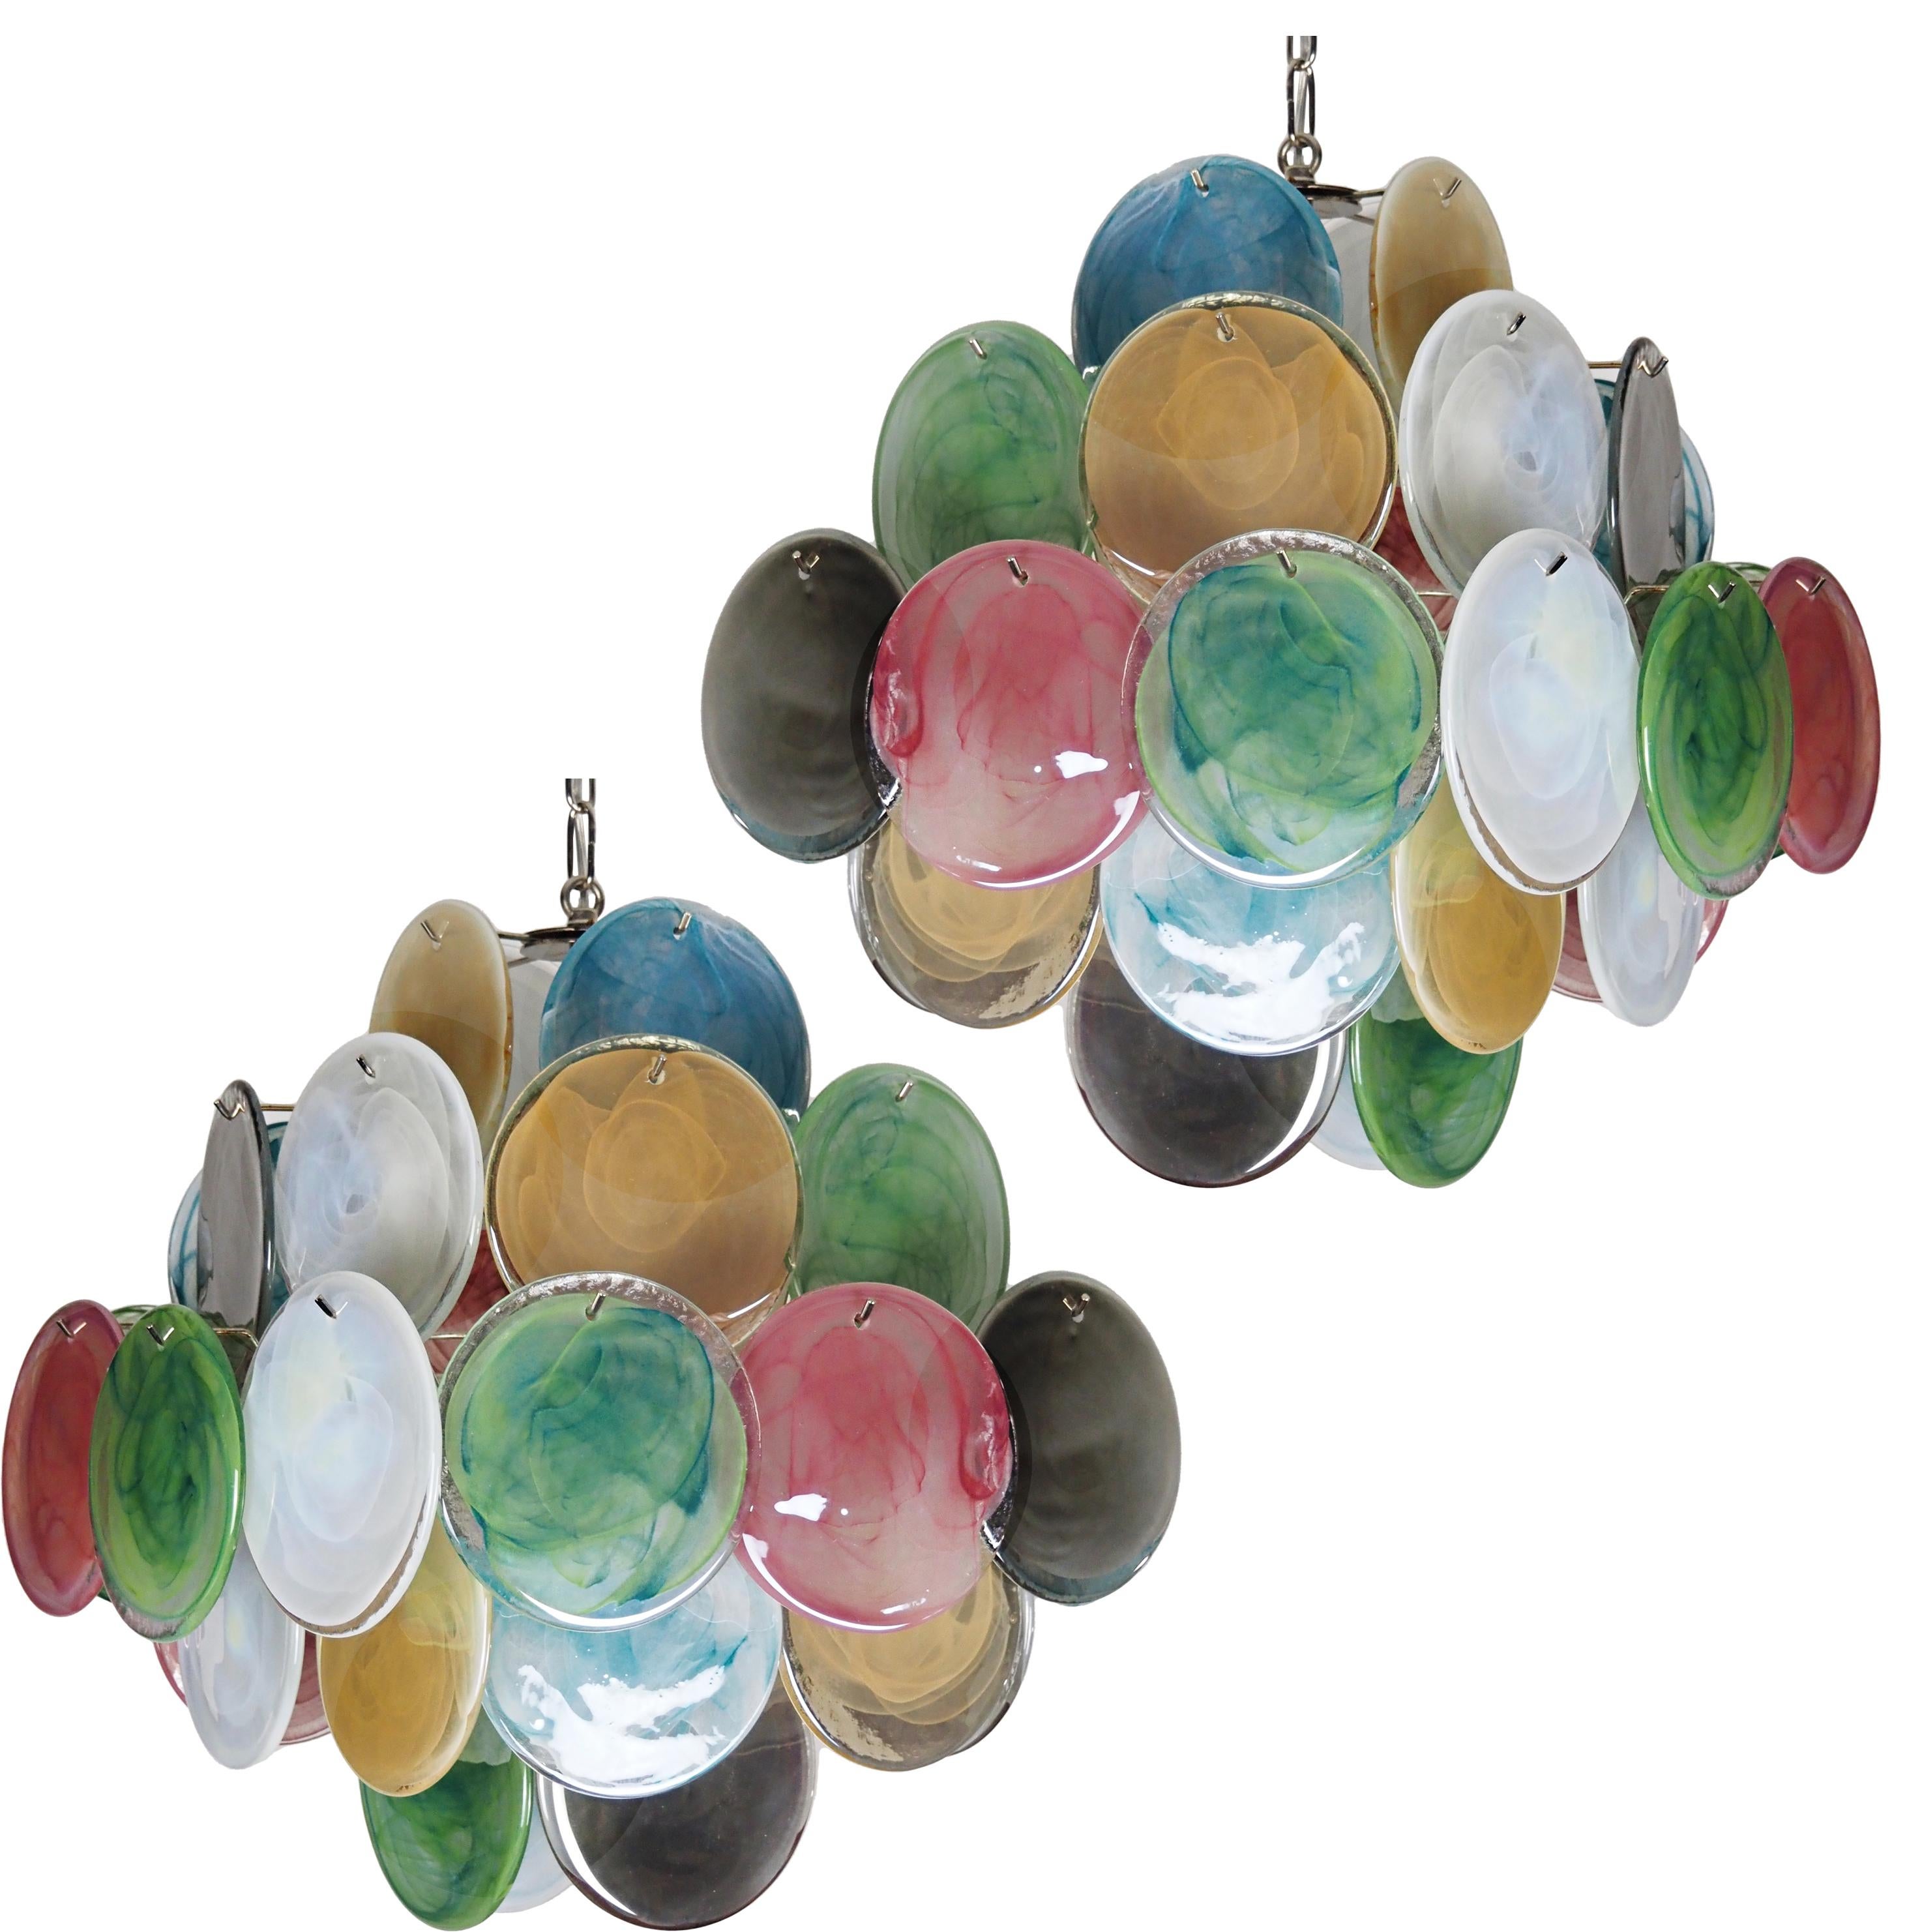 Vintage Italian Murano chandelier in Vistosi style. The chandelier has 36 fantastic multicolored alabaster iridescent glasses in a nickel metal frame.
Period: late XX century
Dimensions: 44,50 inches (150 cm) height with chain; 19,40 inches (50 cm)